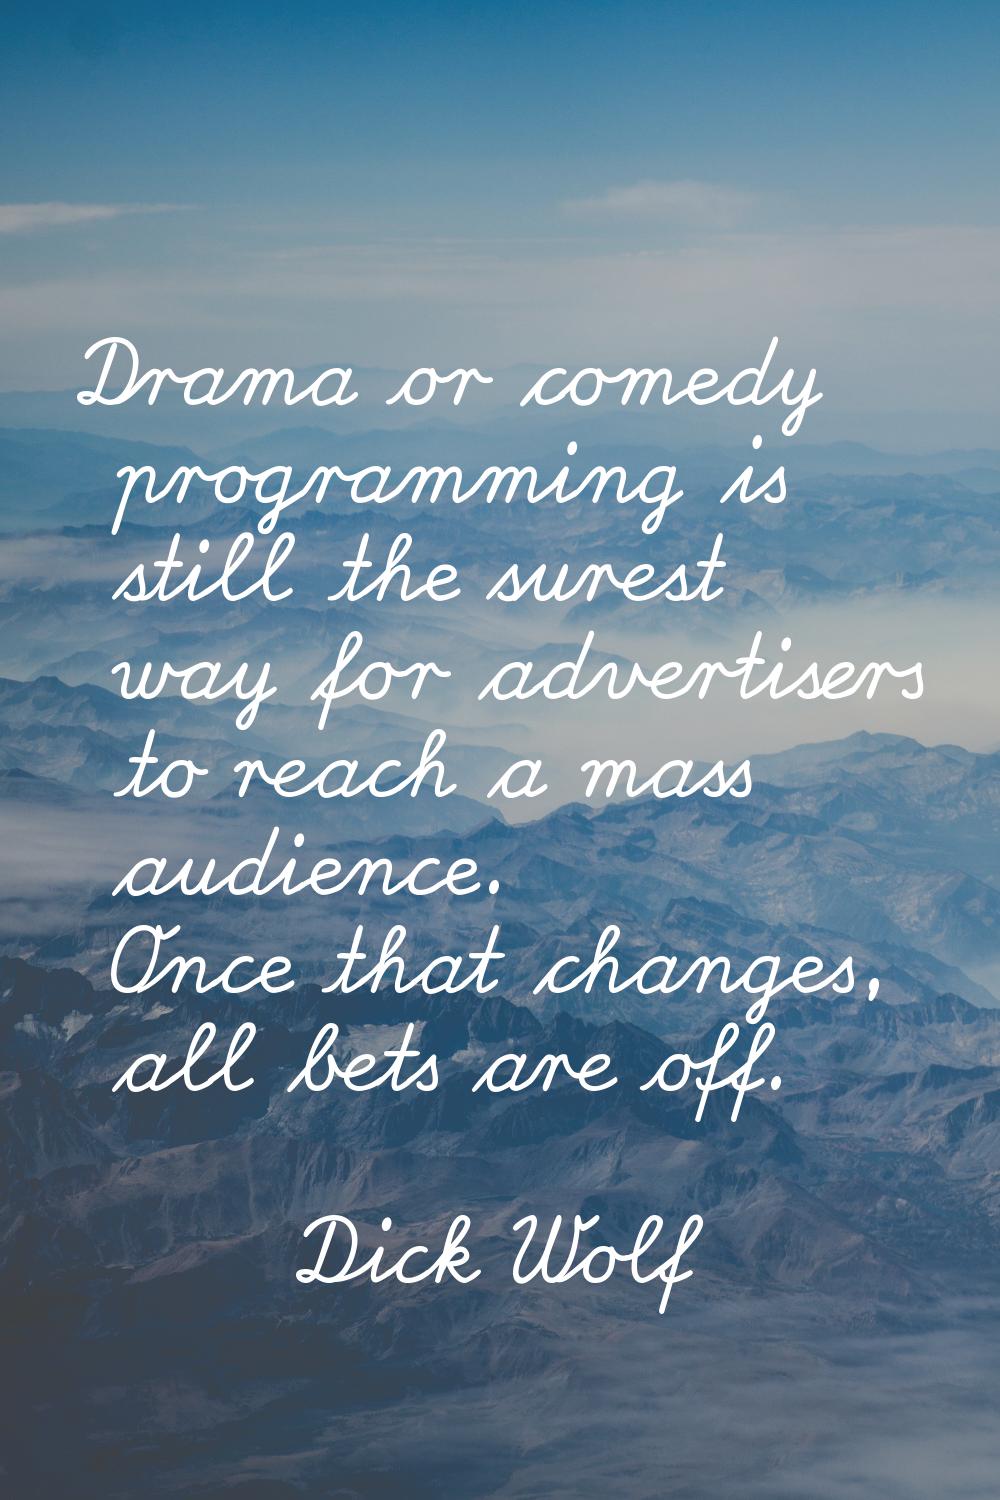 Drama or comedy programming is still the surest way for advertisers to reach a mass audience. Once 